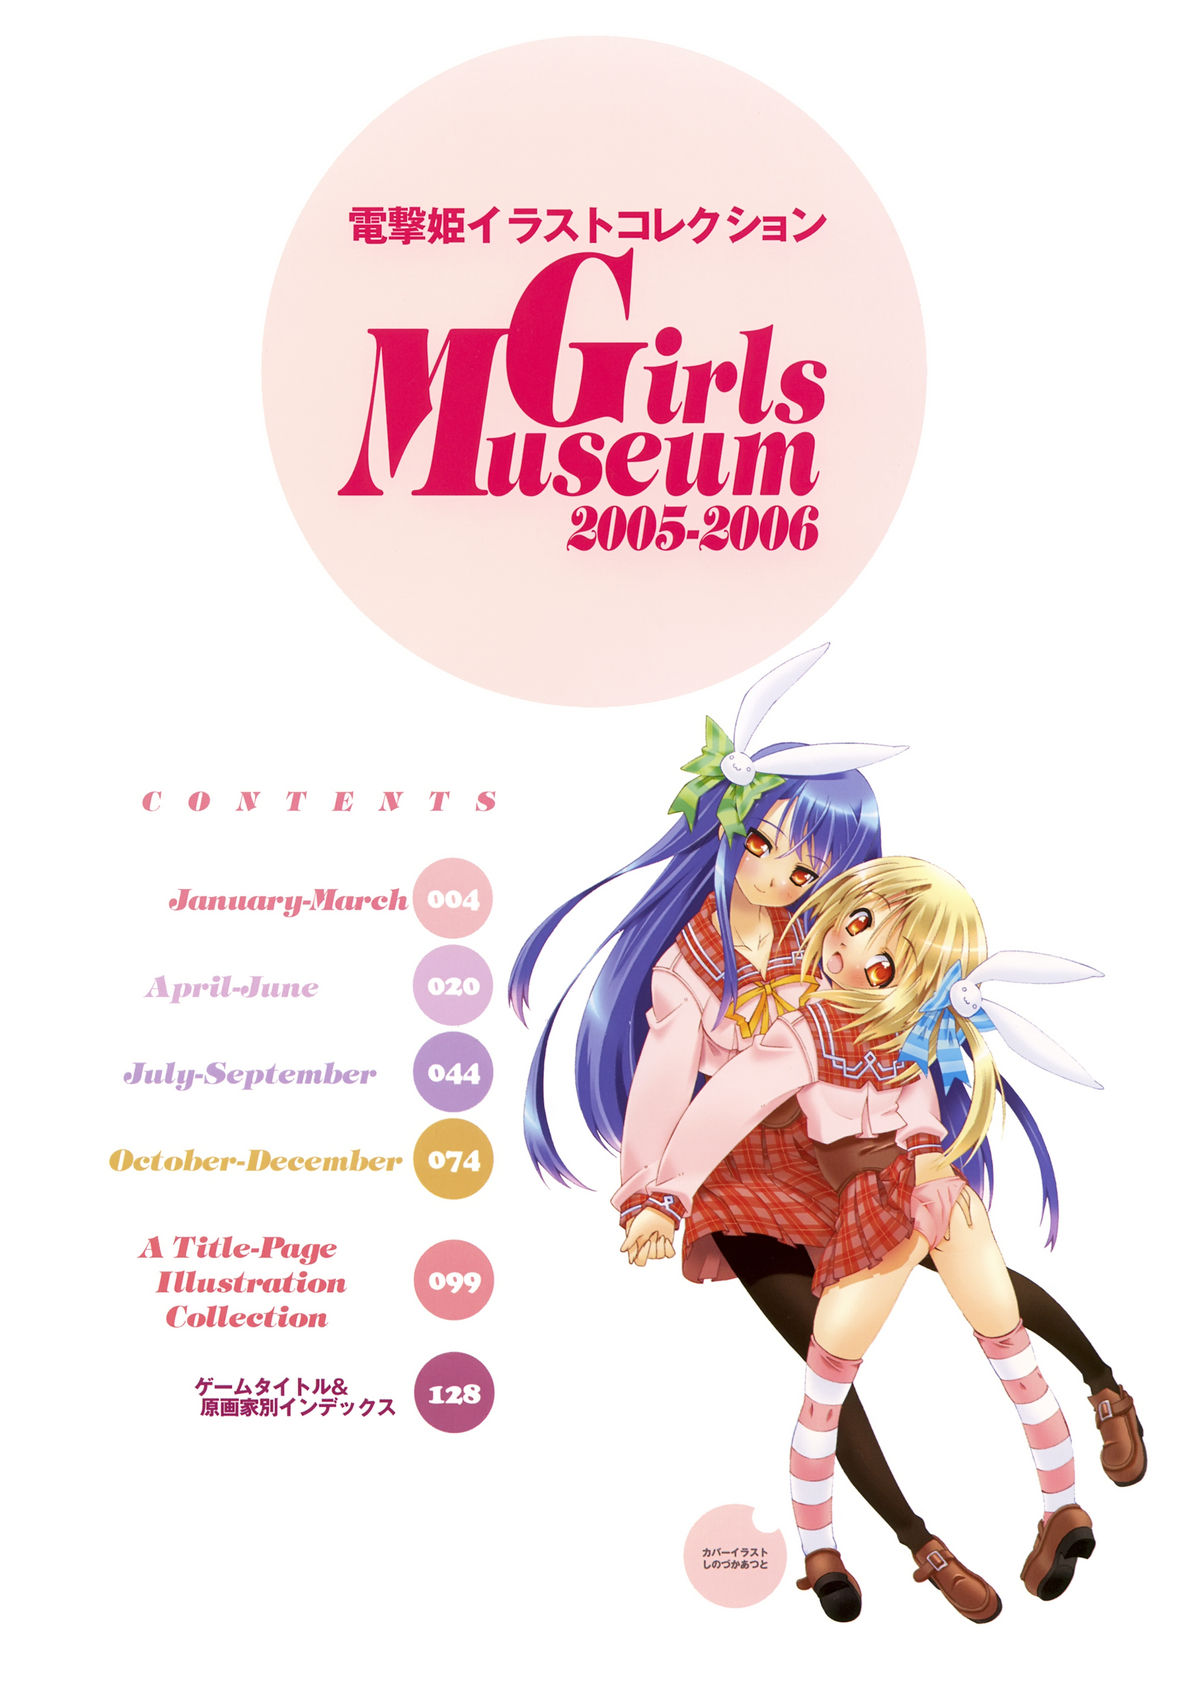 Dengeki-Hime Collection - Girls Museum 2005-2006 page 4 full